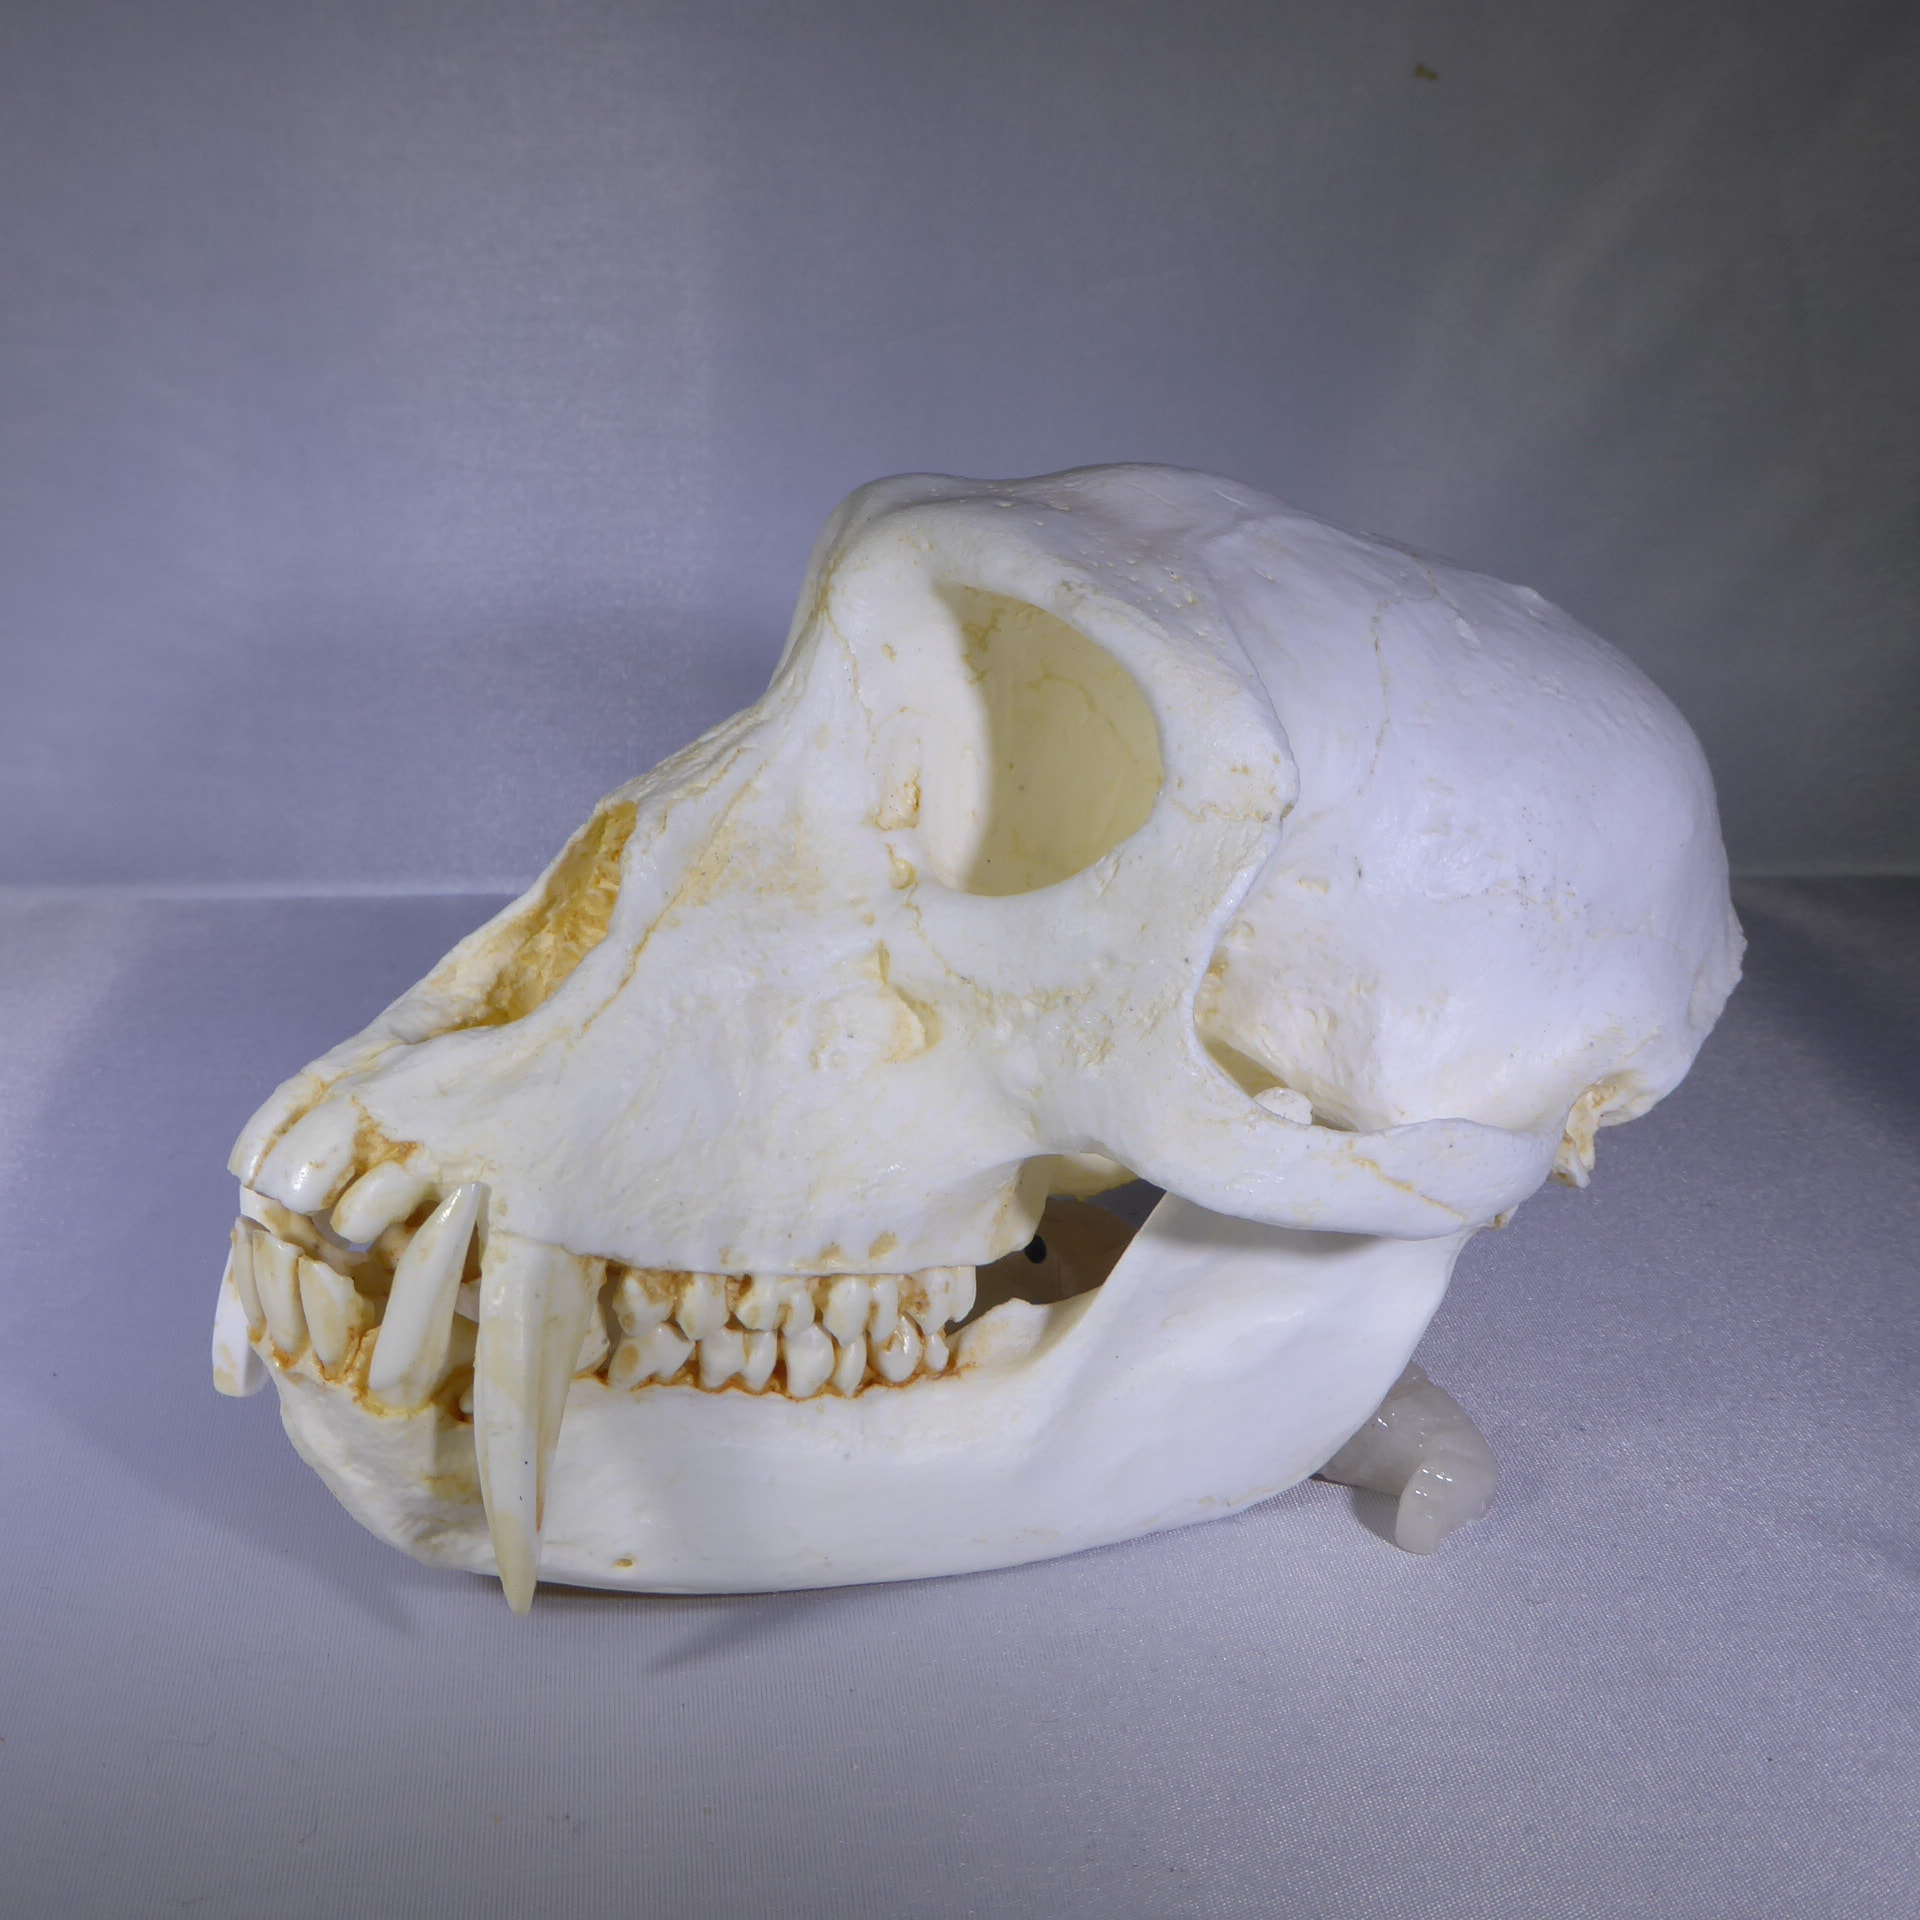 patas-male-monkey-skull-facing-left-CARB3597